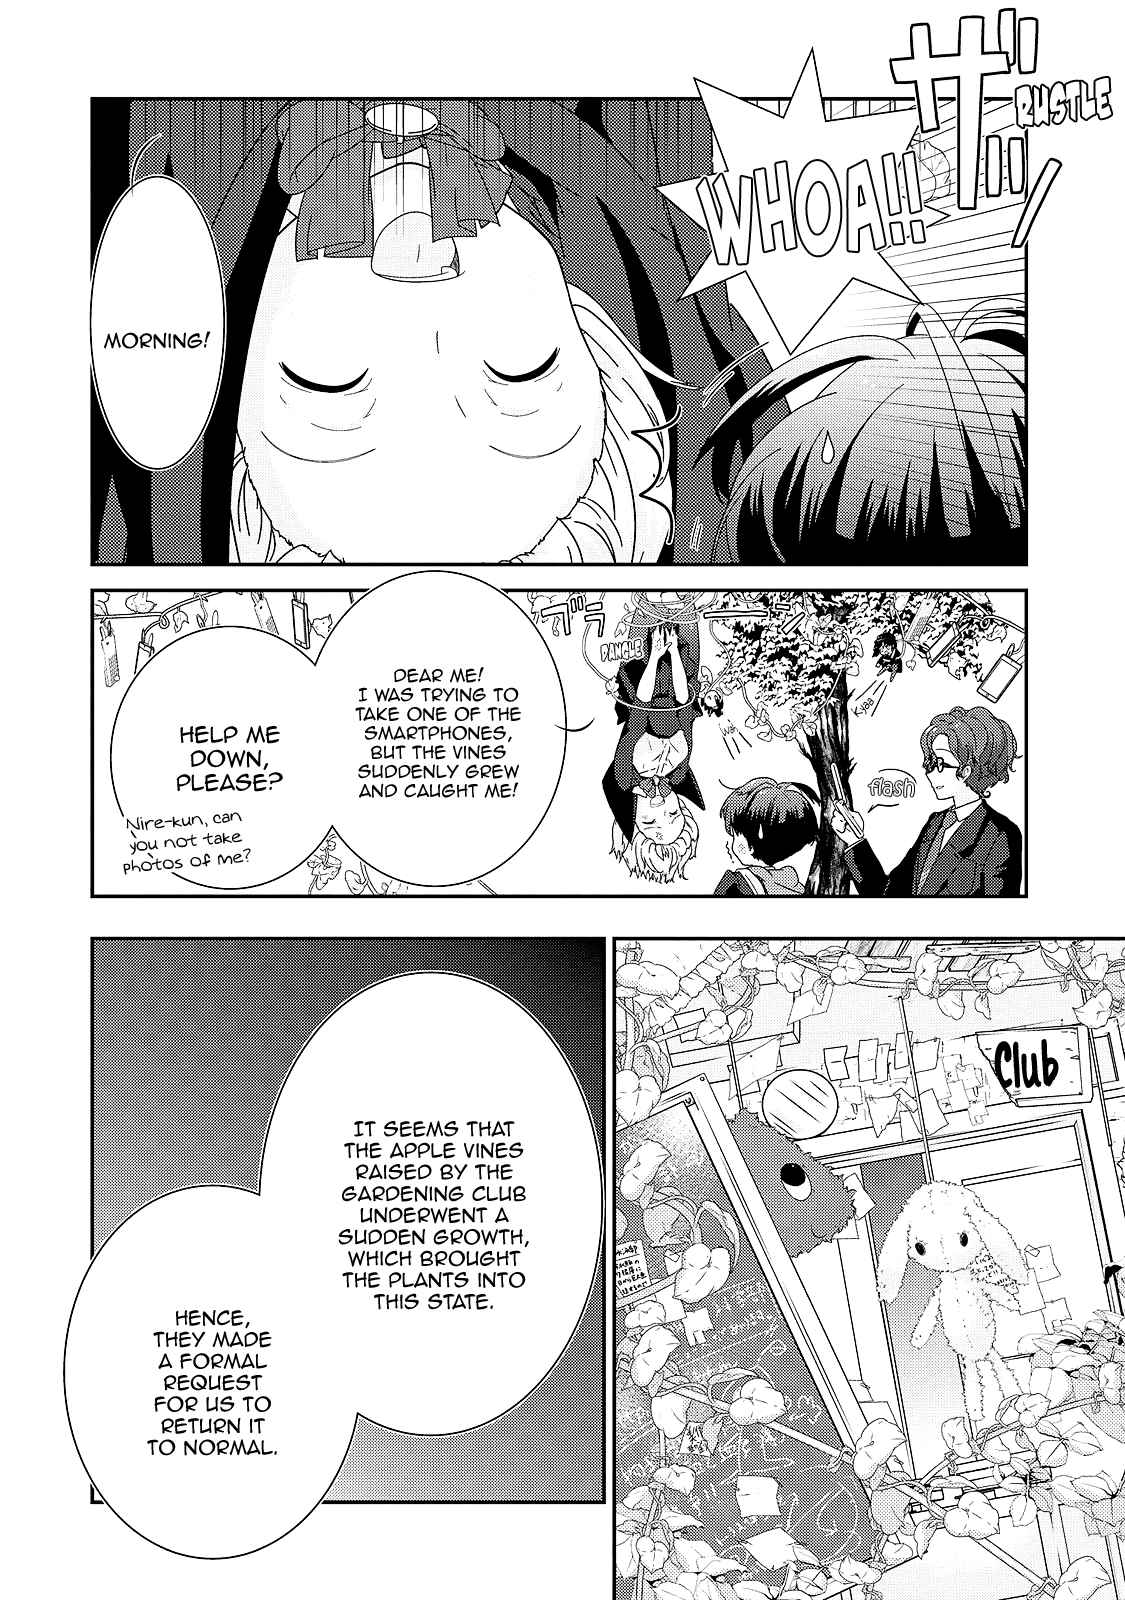 The Female God of Babel: KAMISAMA Club in Tower of Babel Vol. 1 Ch. 2 Her Snack, Politics